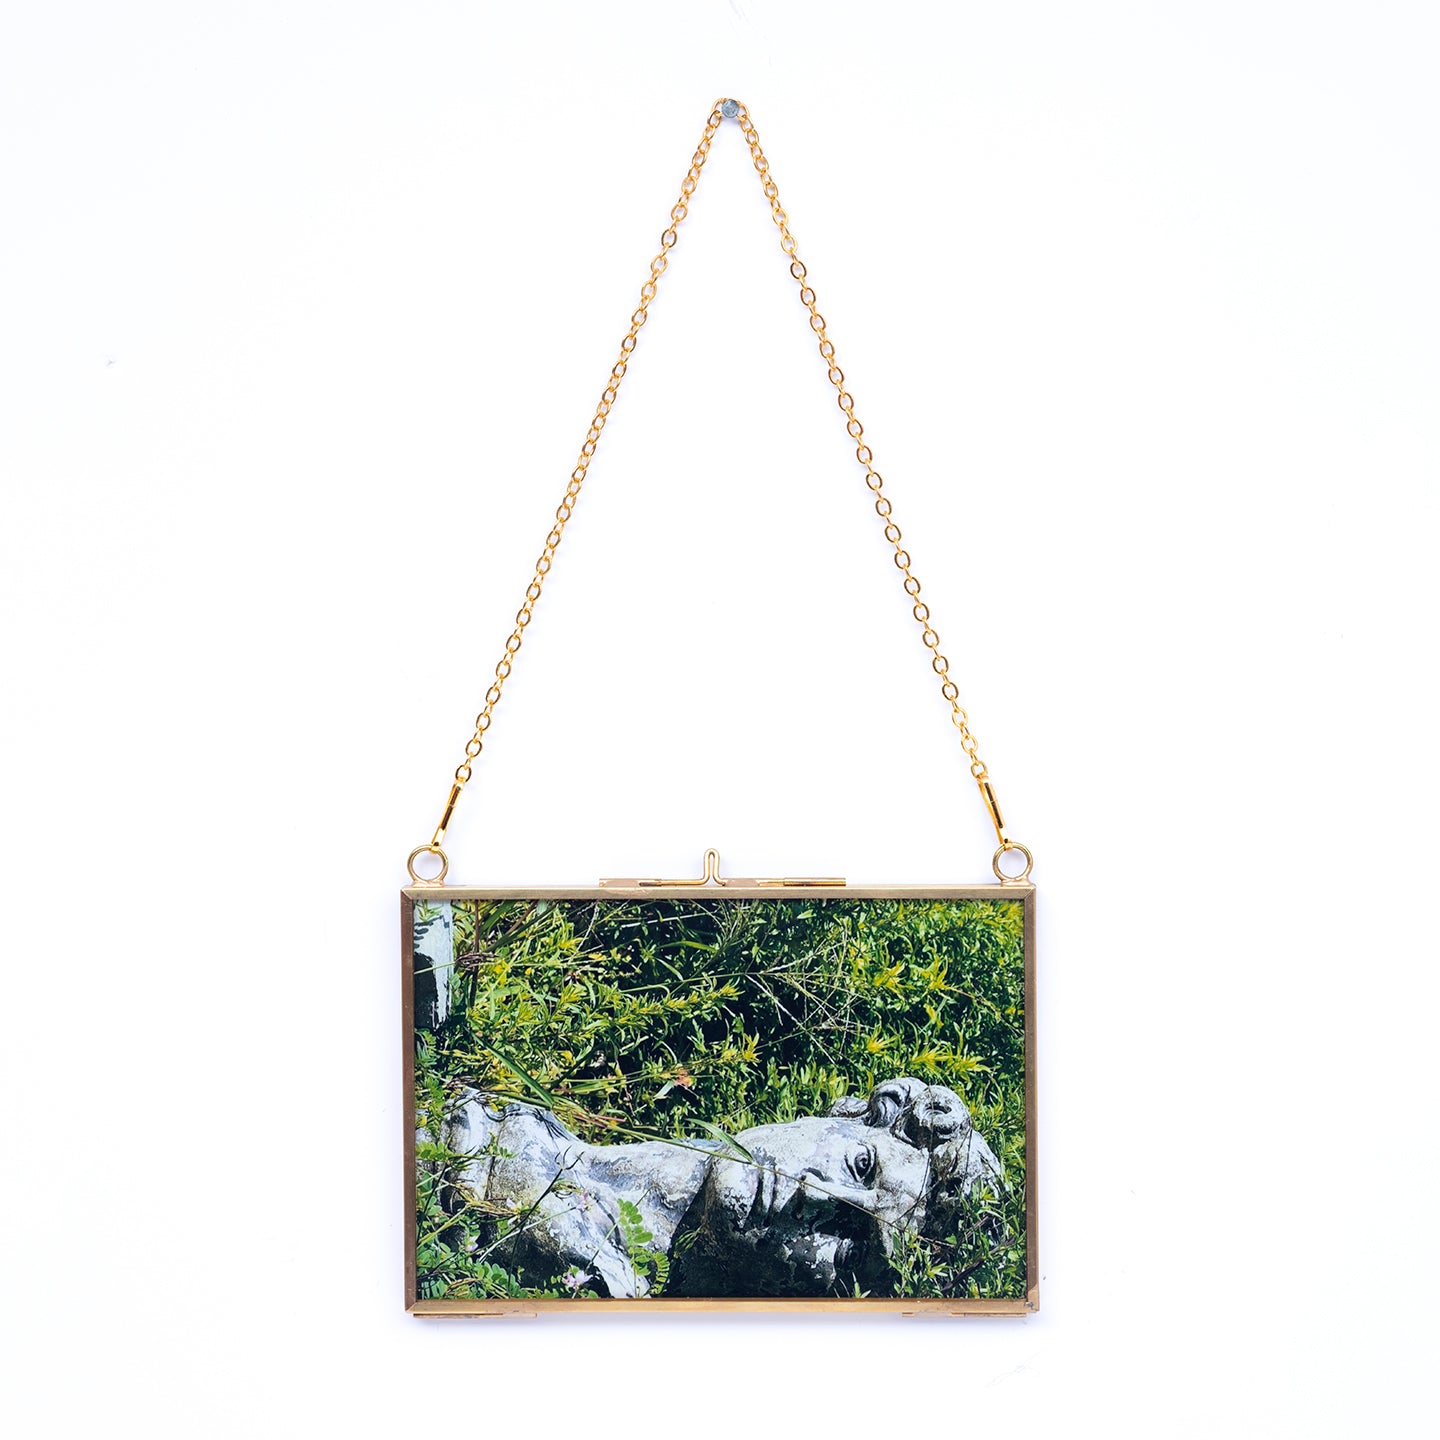 Rectangle shaped frames with artistic images of nature title Wood U from Everyday Art Editions